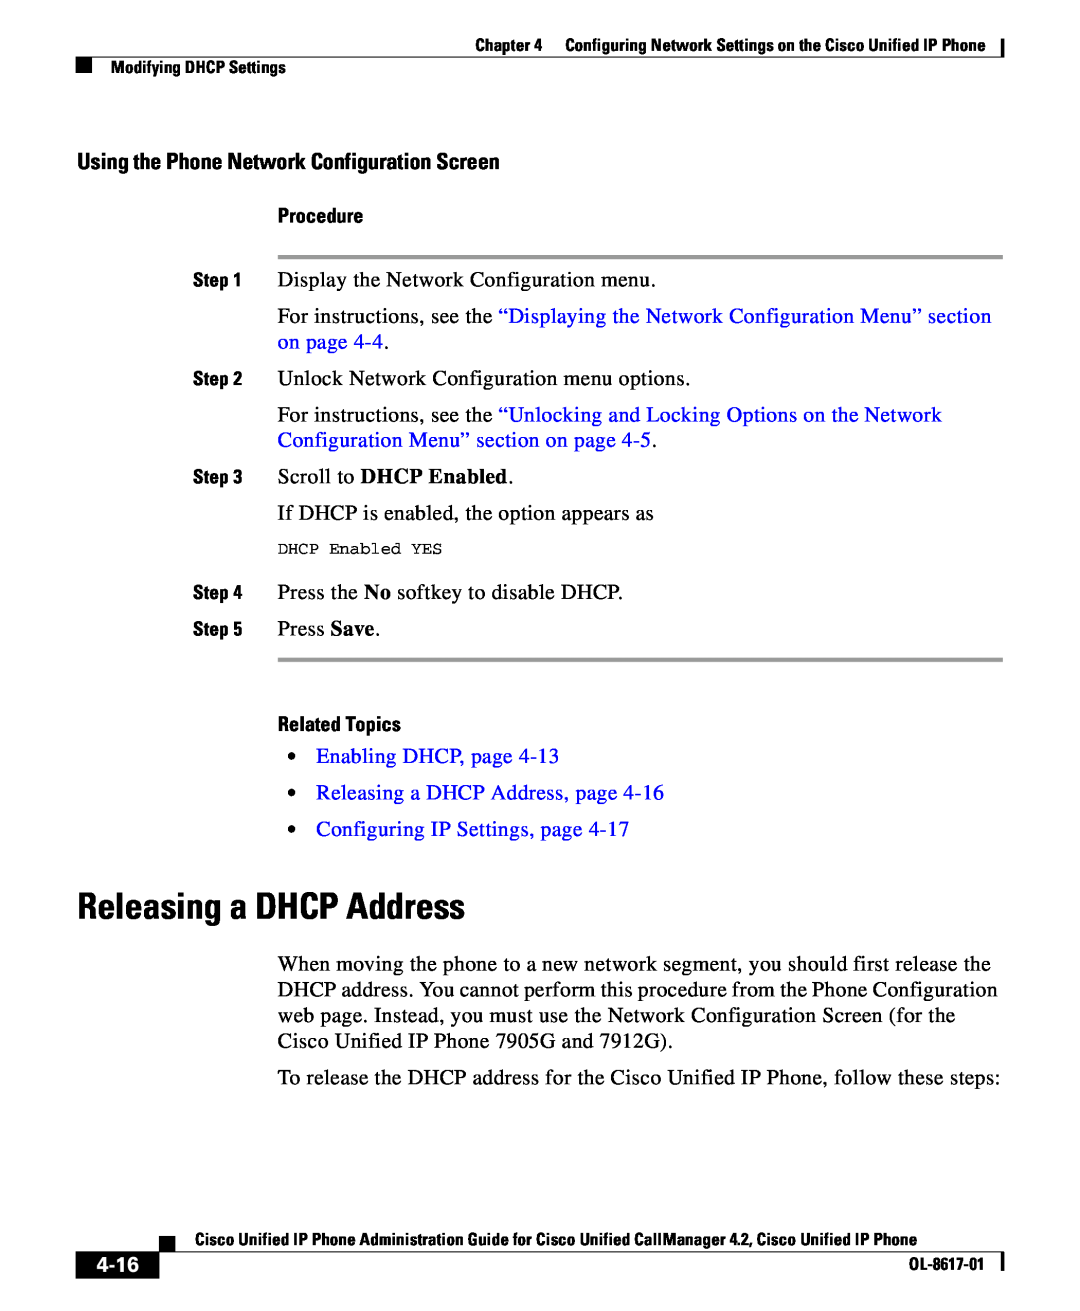 Cisco Systems 4.2 manual Enabling DHCP, page Releasing a DHCP Address, page, 4-16, Procedure, Scroll to DHCP Enabled 